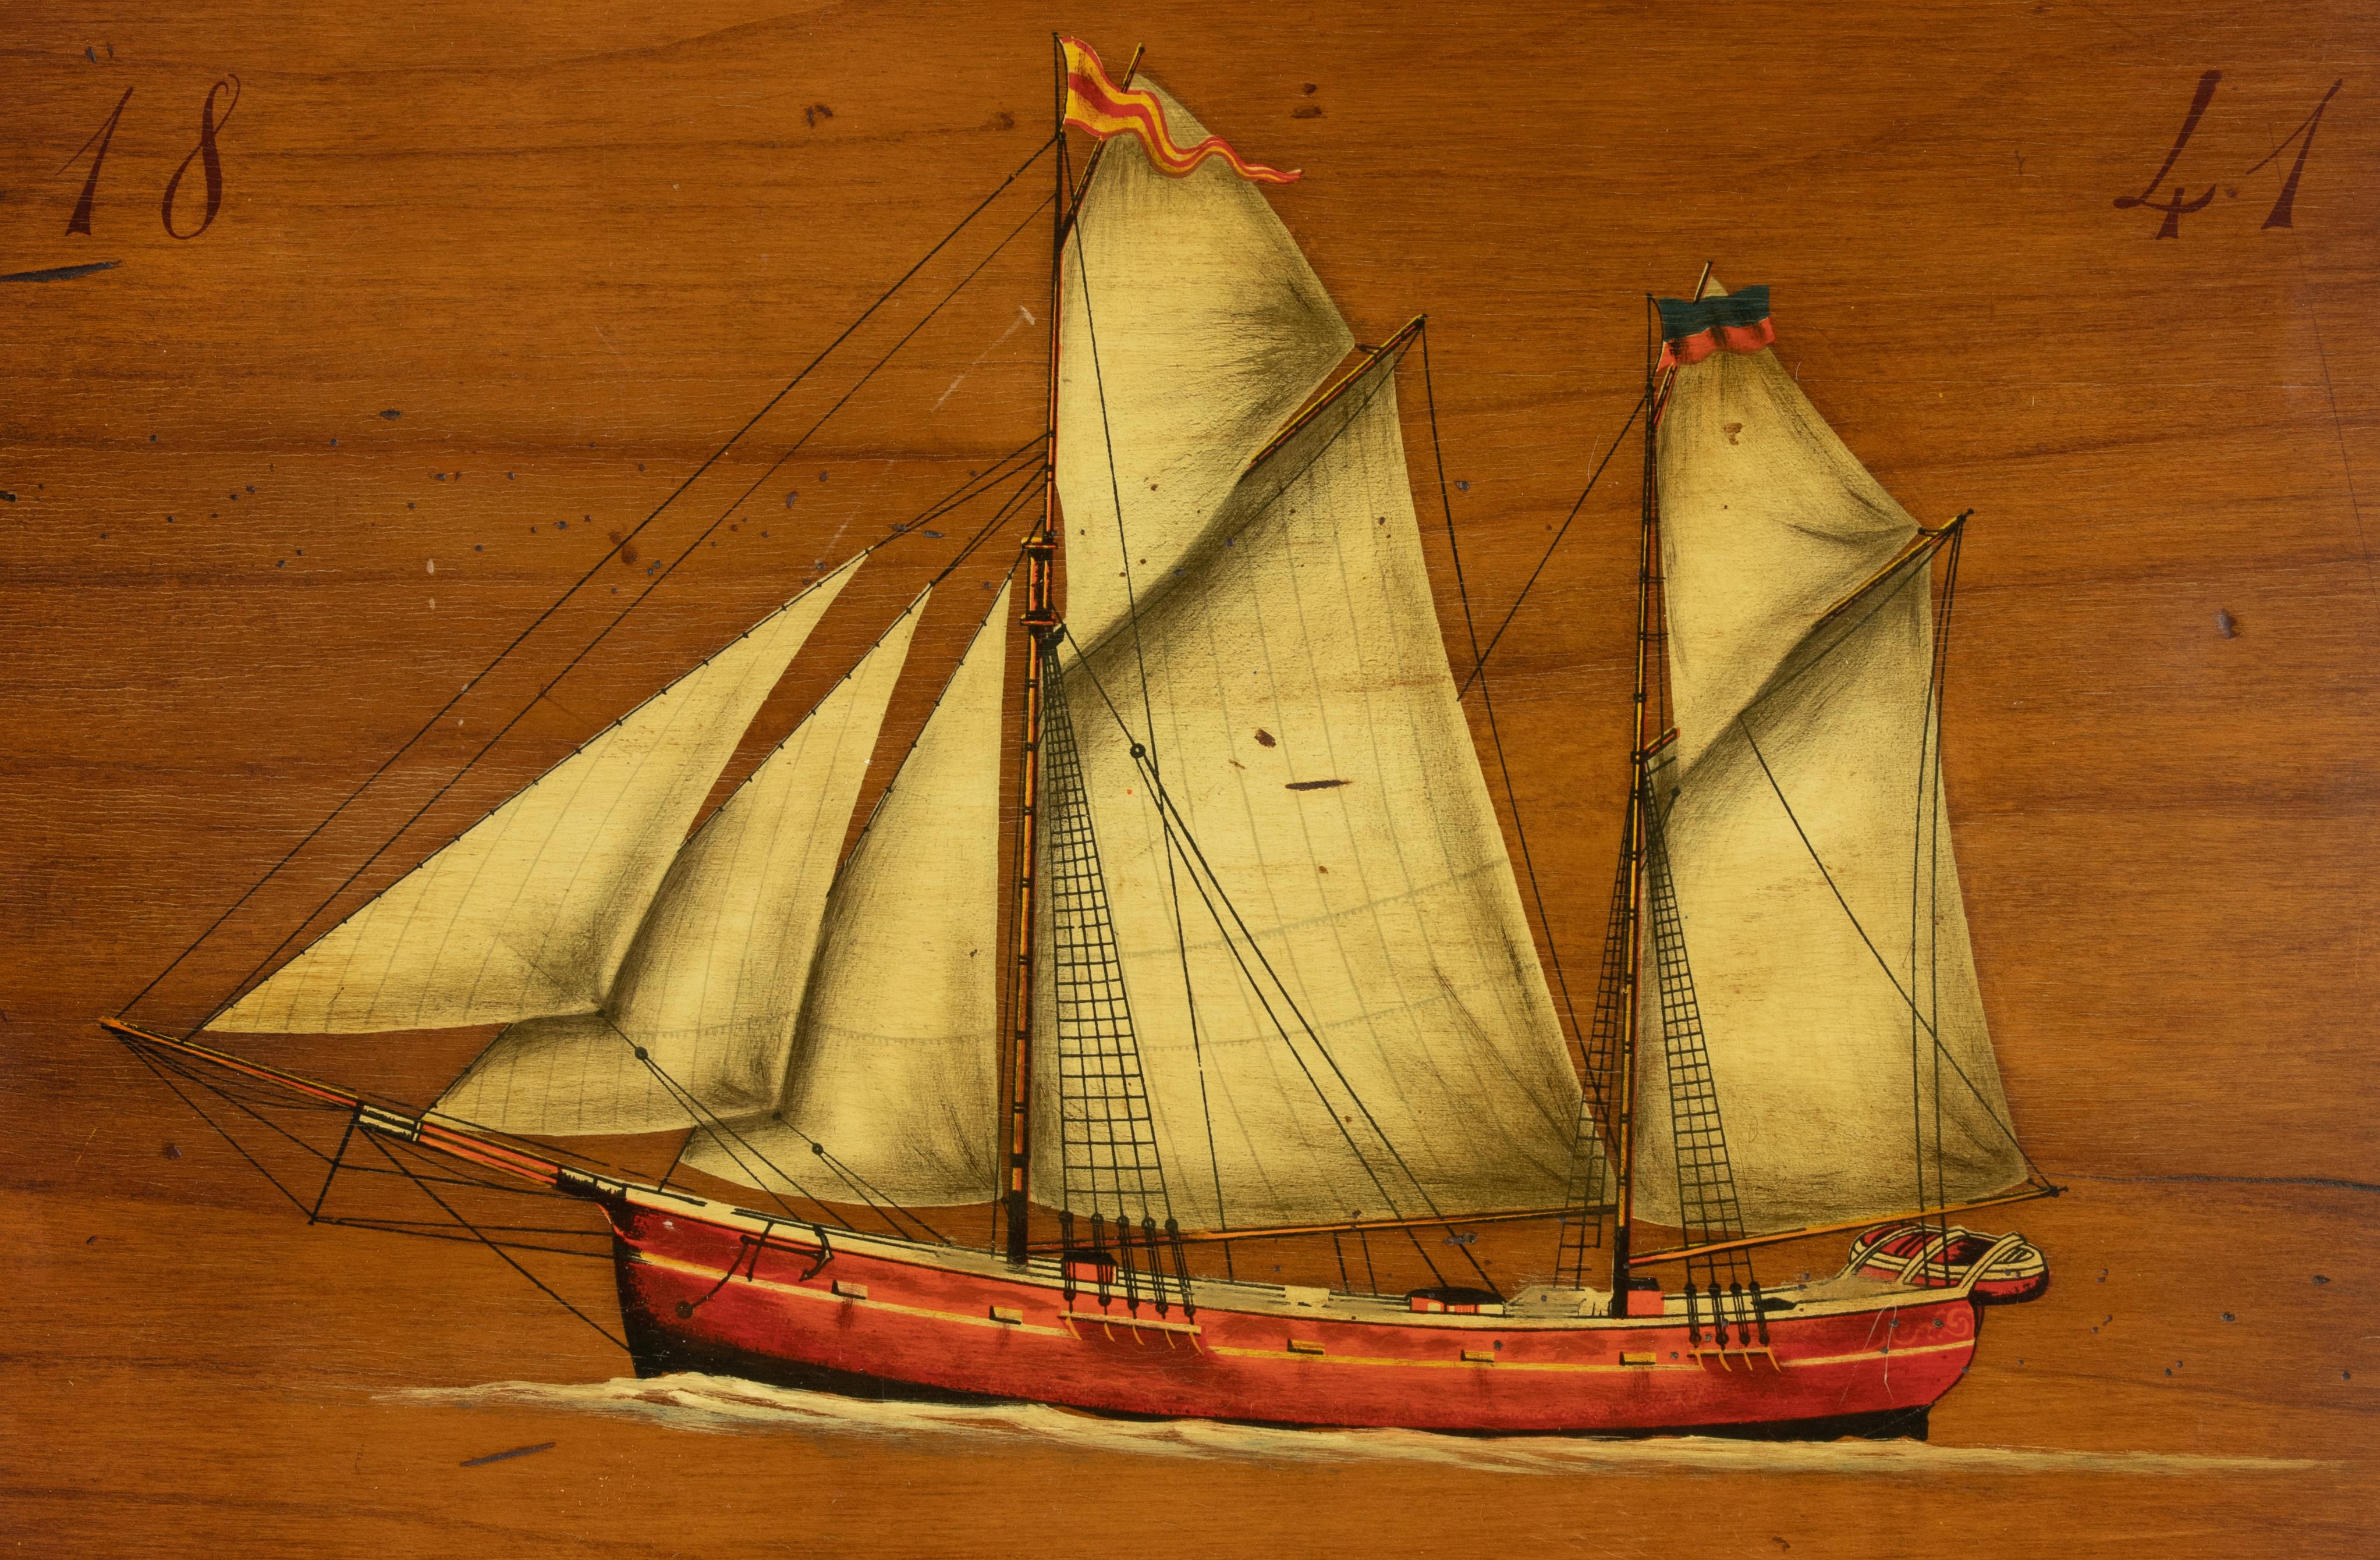 The Fast Schooner Clipper Aurora, Early 20th Century. 

Tempera Painting on wood.

35 x 45 cm

Good condition.

